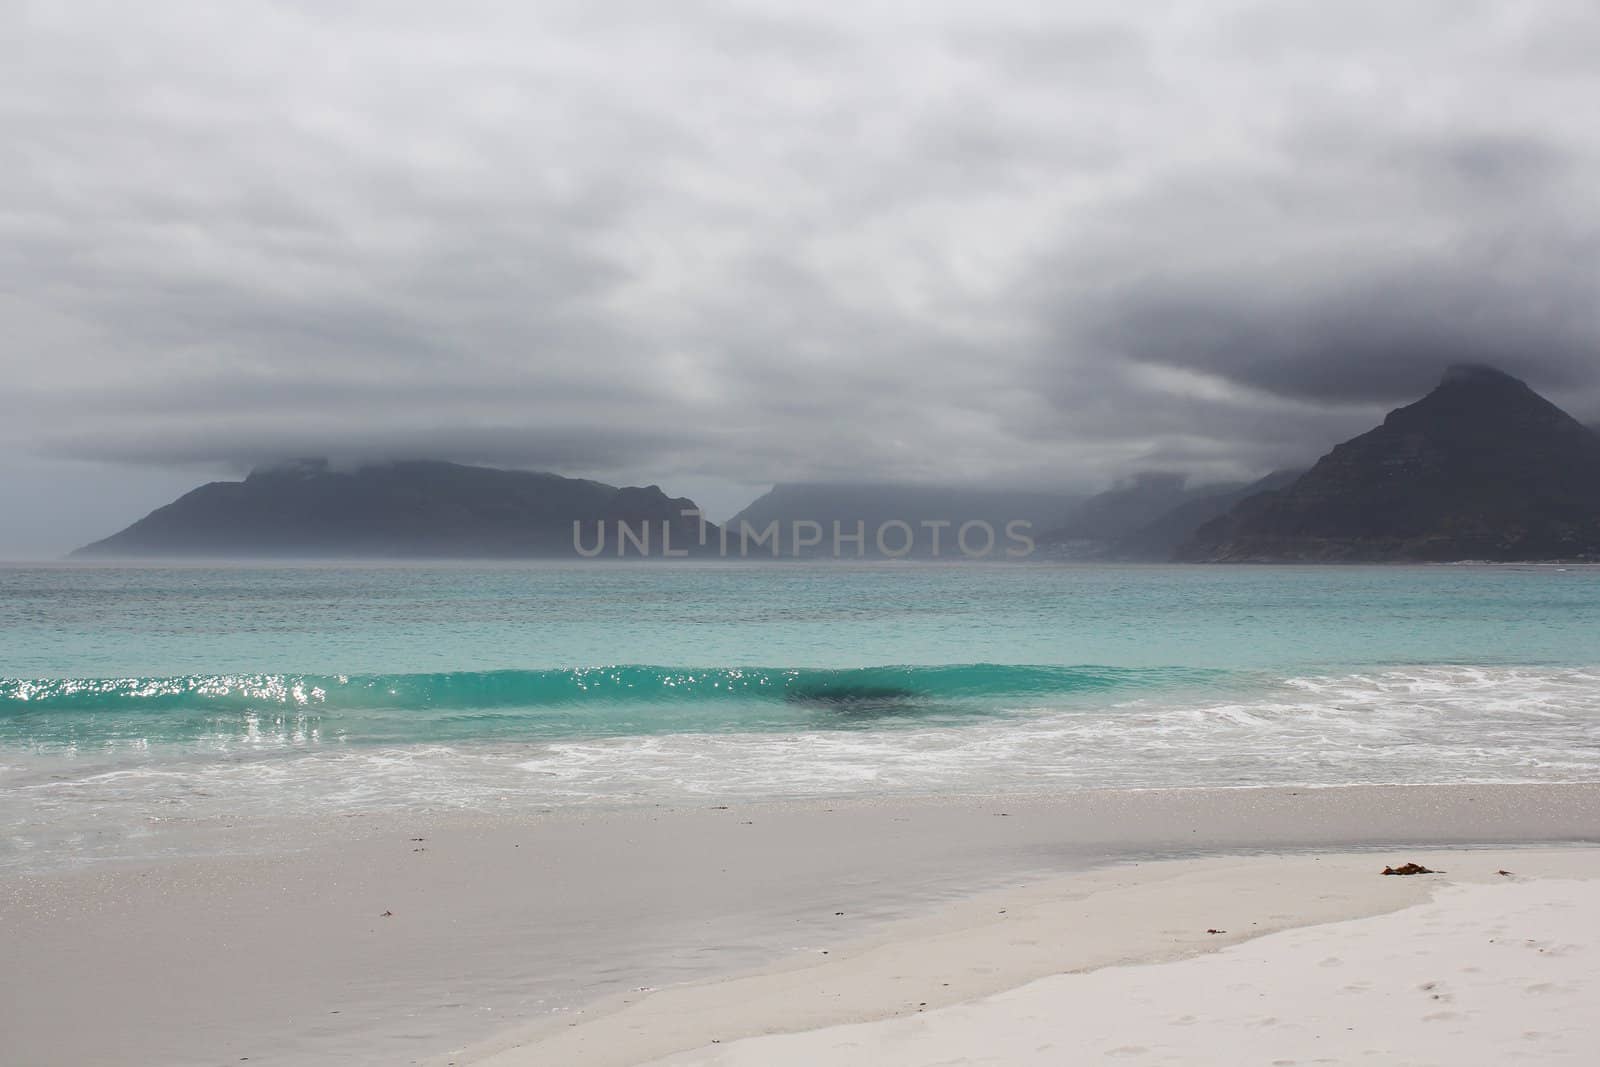 Beach of Kommetjie with an upcoming storm in the background and blue water